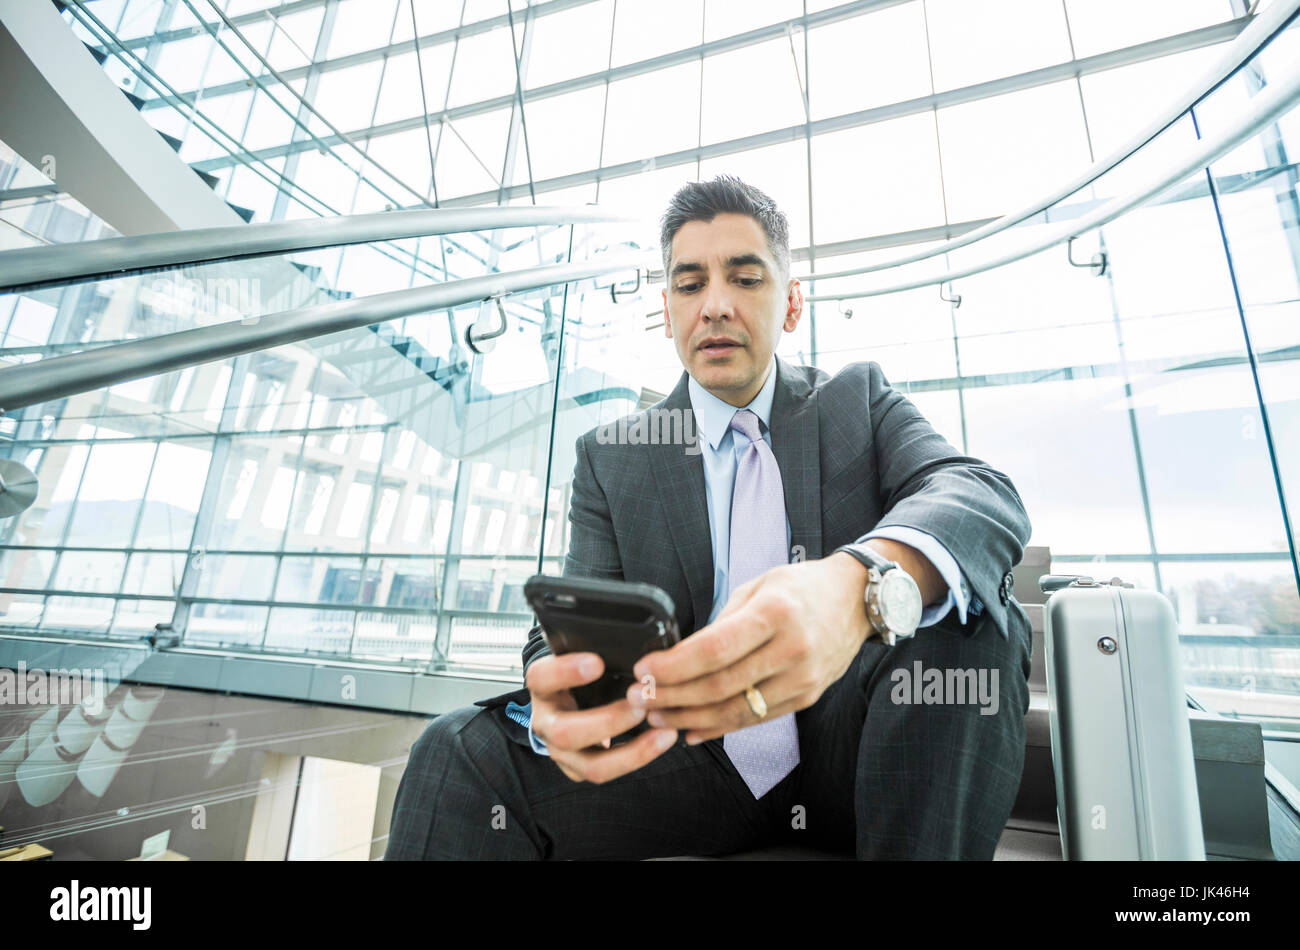 Serious Mixed Race businessman sitting on staircase texting on cell phone Stock Photo